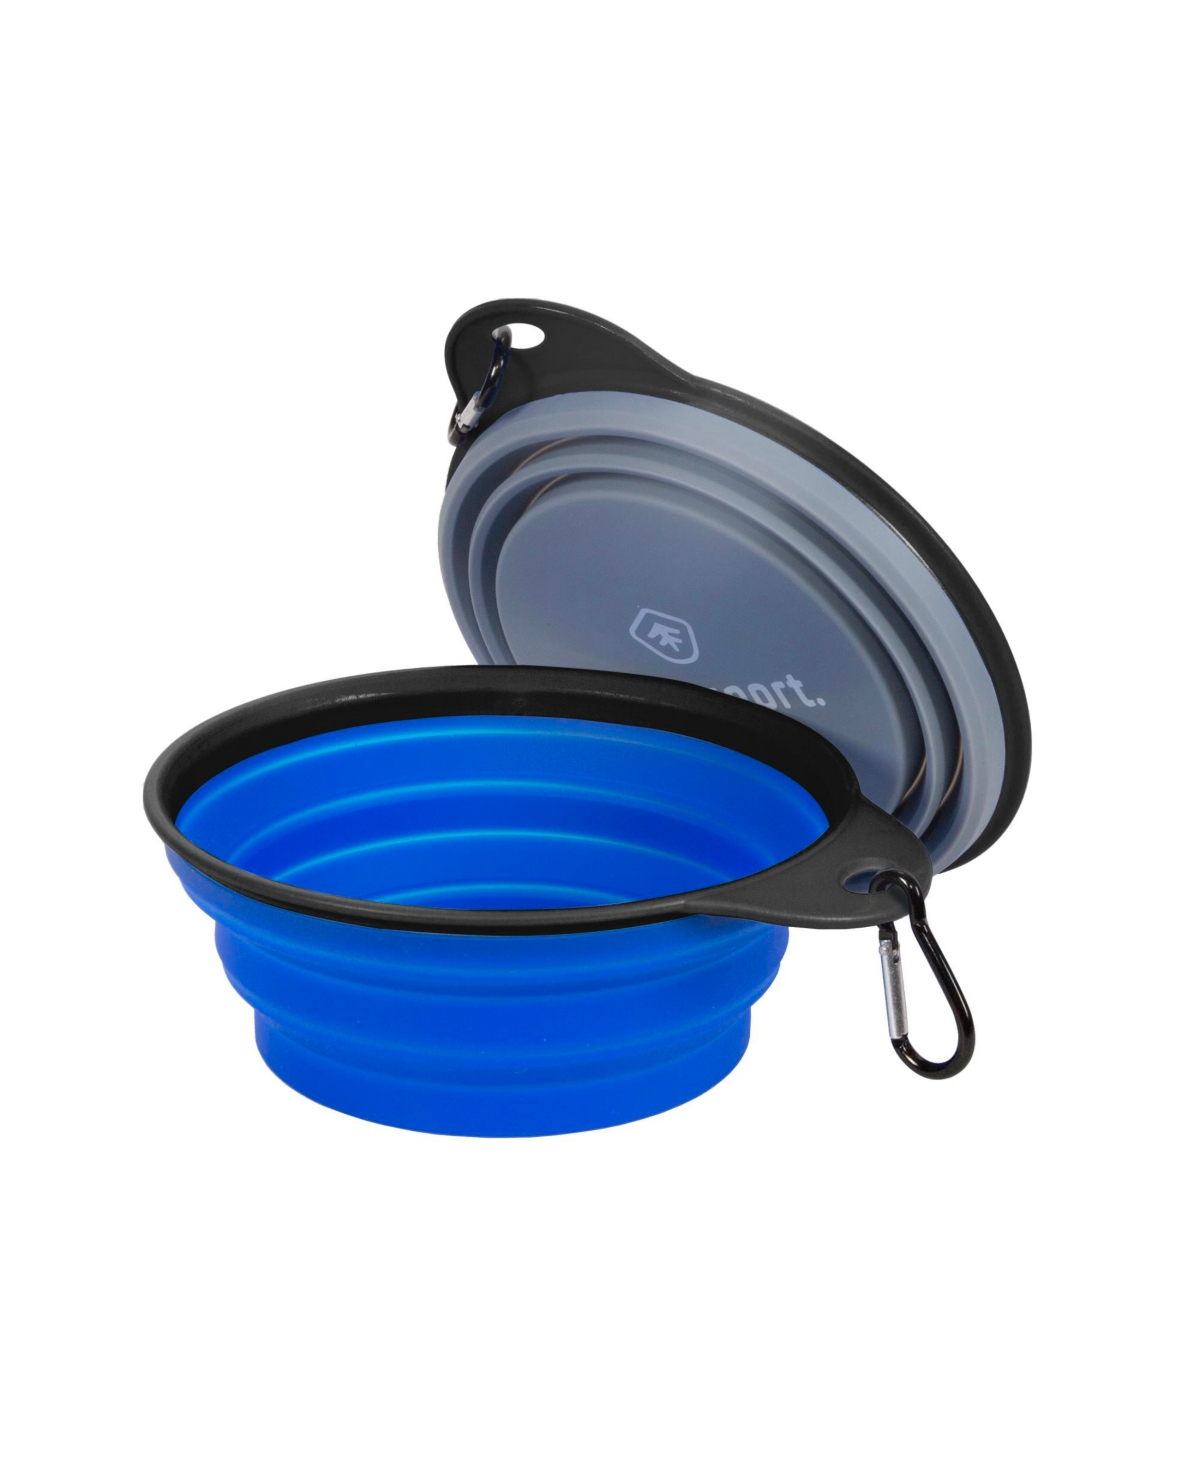 Collapsible Silicon Travel Bowls - 2 Pack - Blue